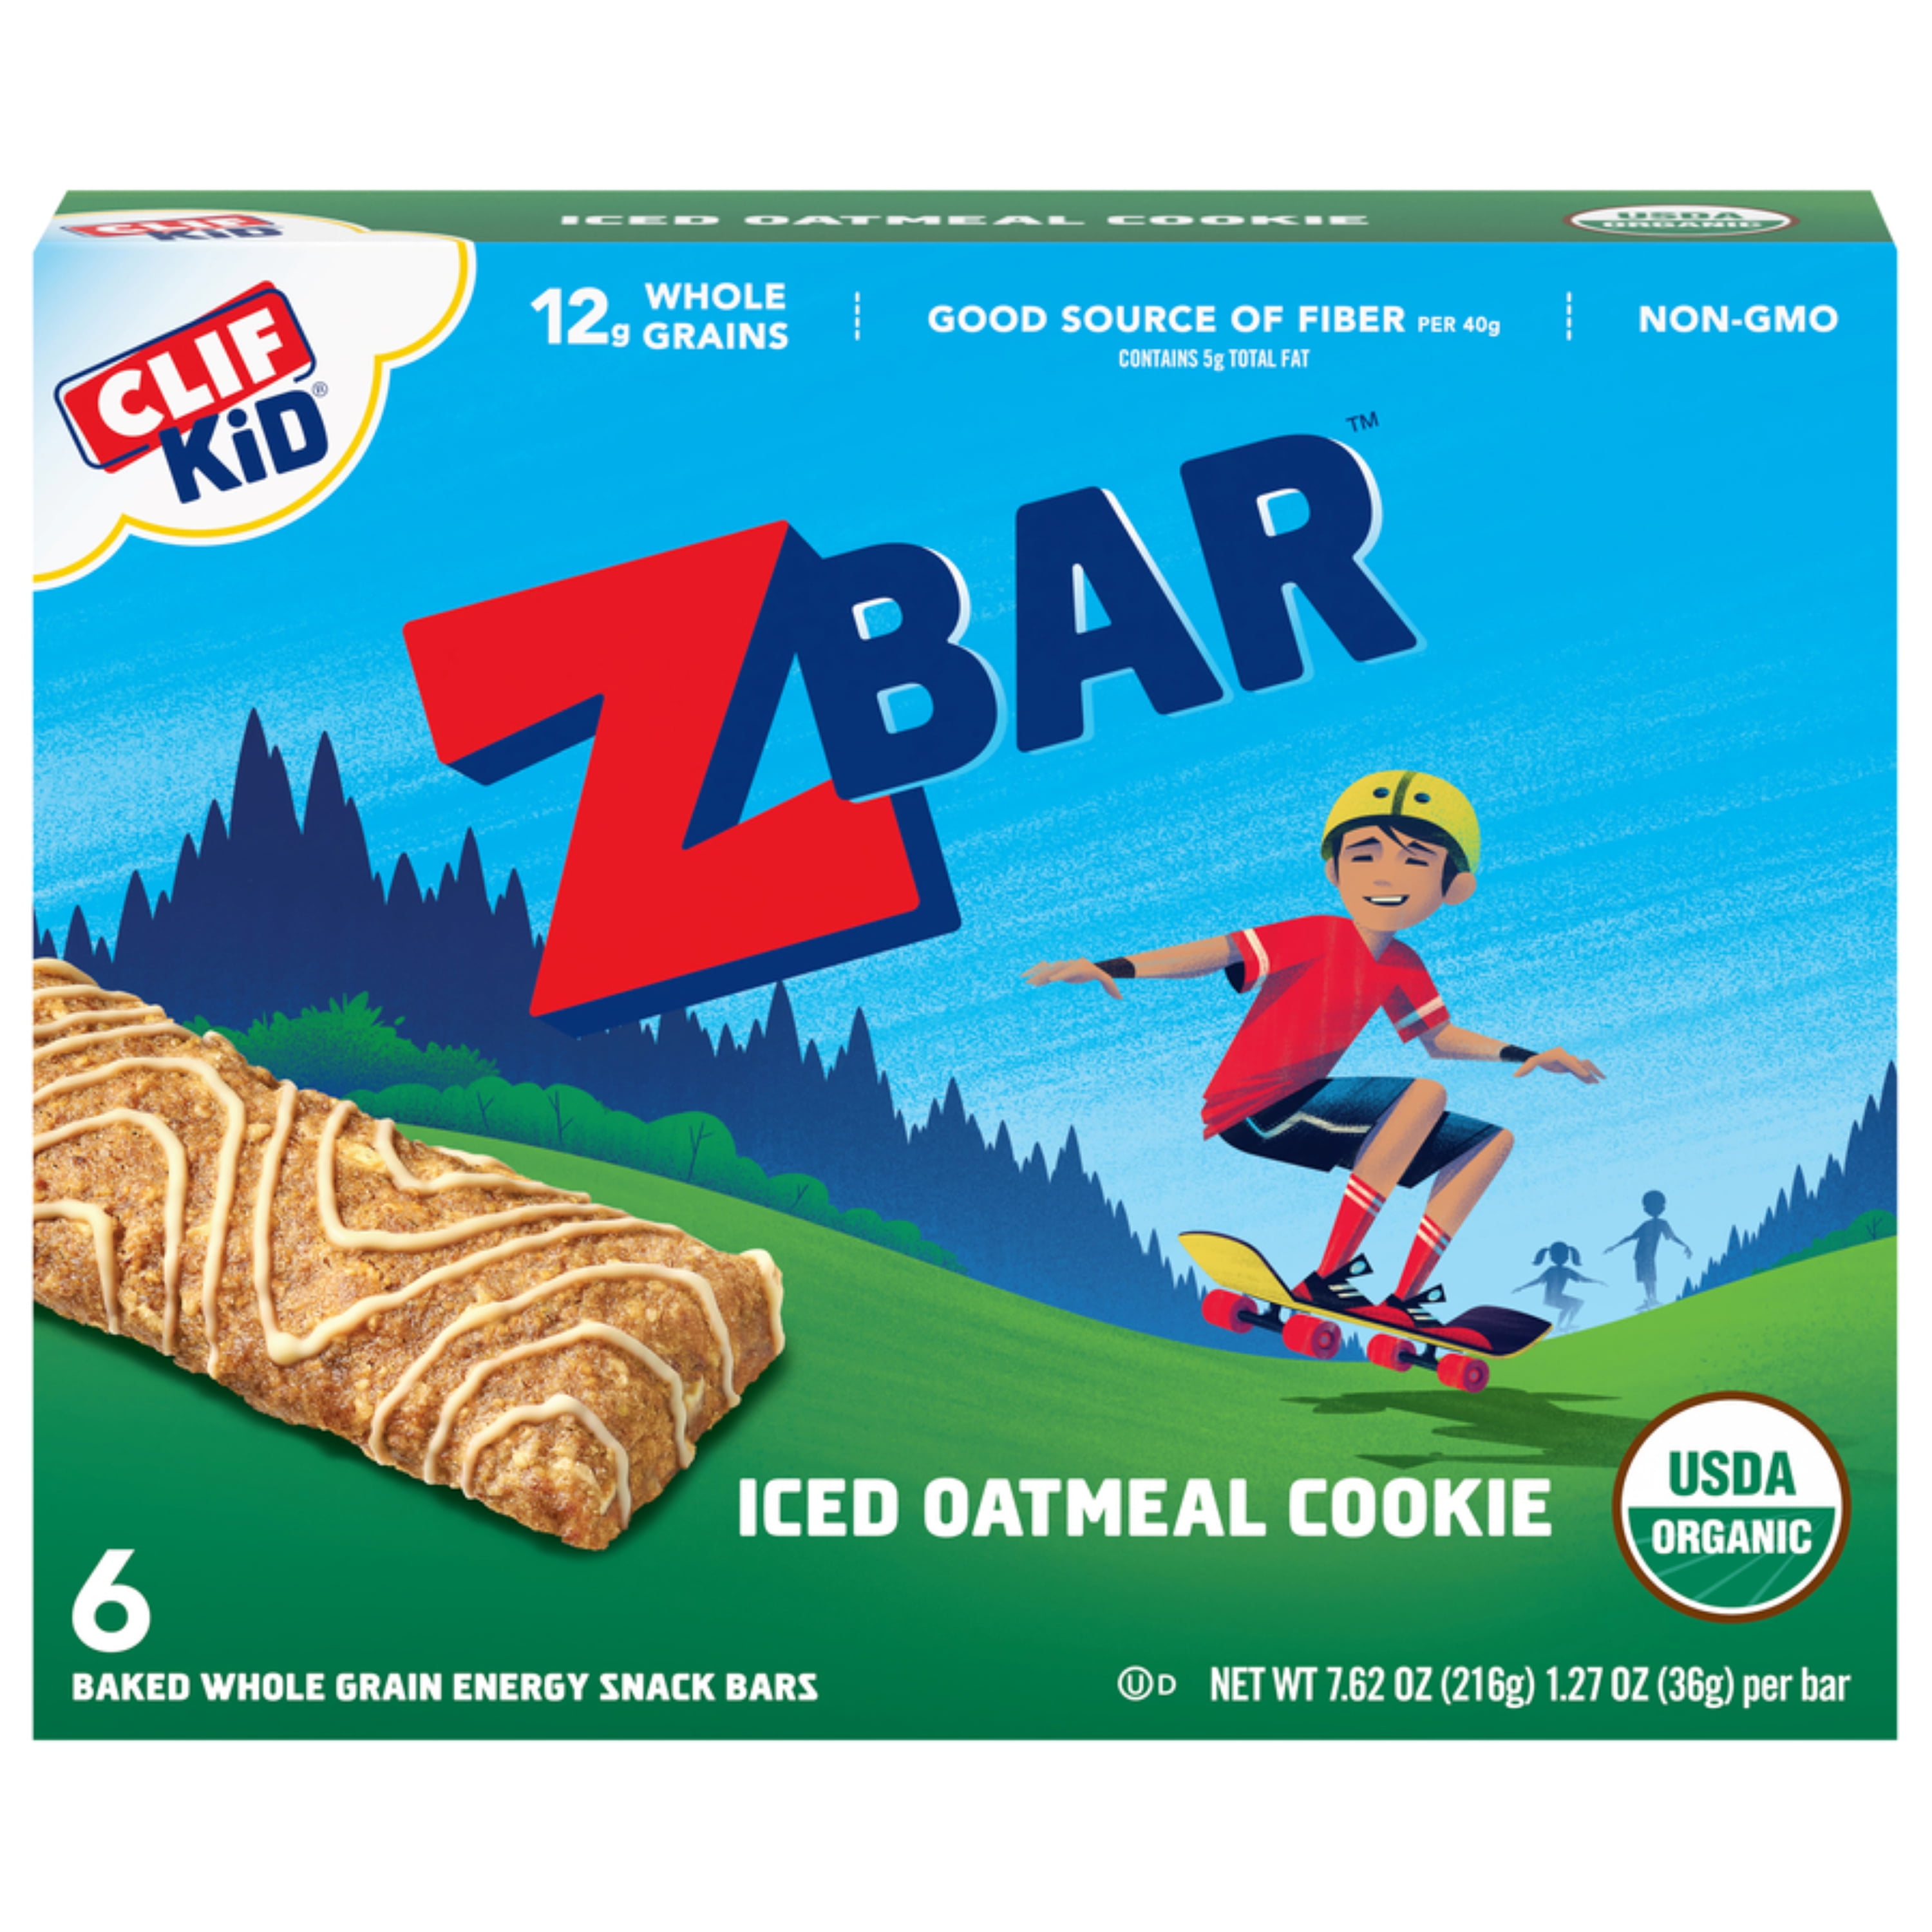 Clif Kid ZBar Iced Oatmeal Cookie Baked Whole Grain Energy Snack Bars, 1.27 oz, 6 count